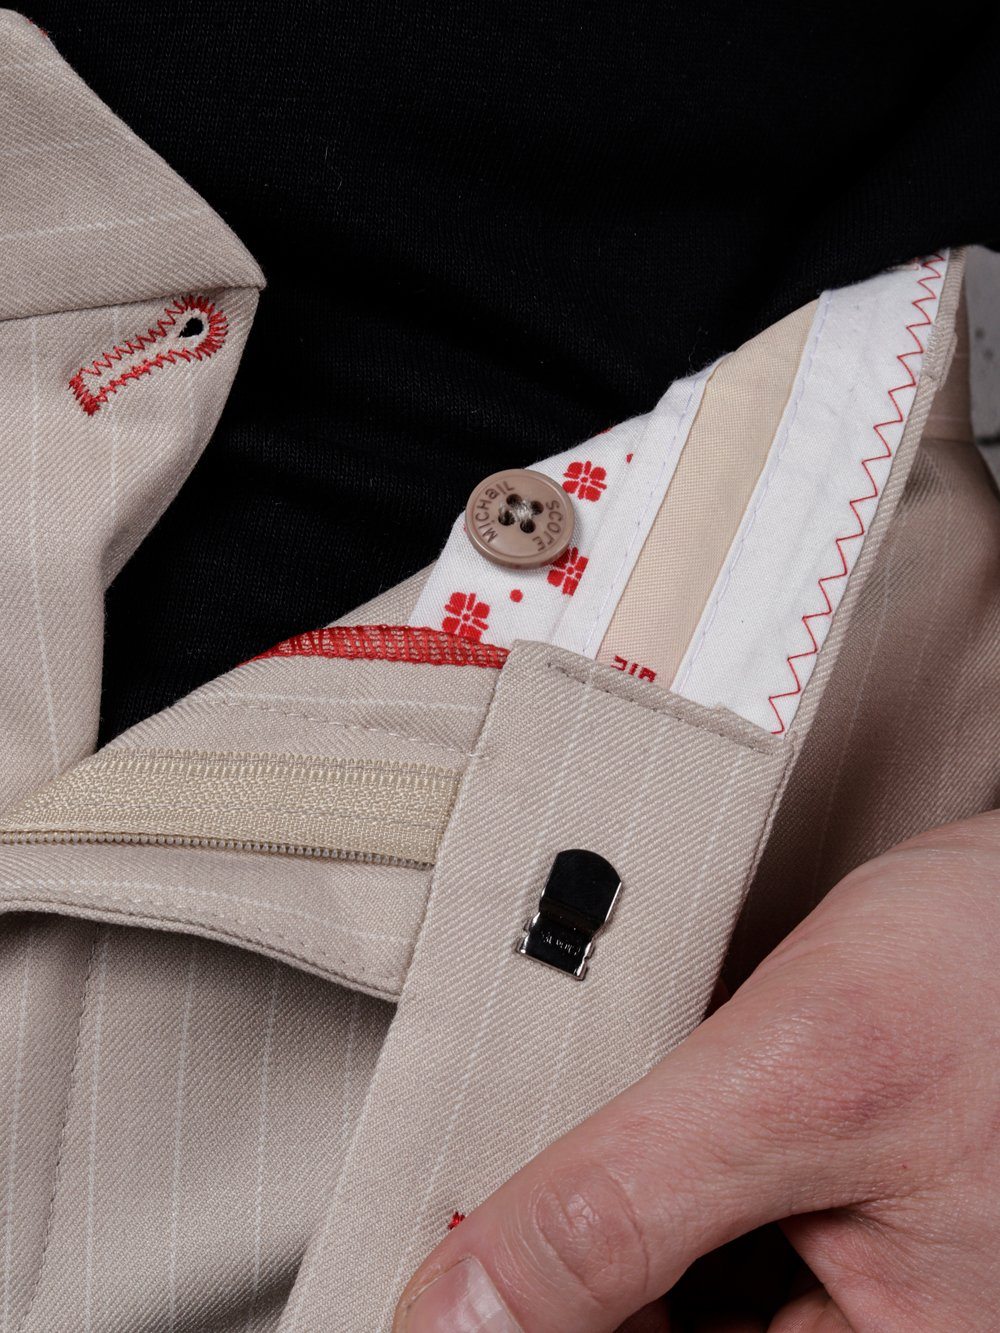 A man's LA CREME skinny fit pants pocket with a red button.